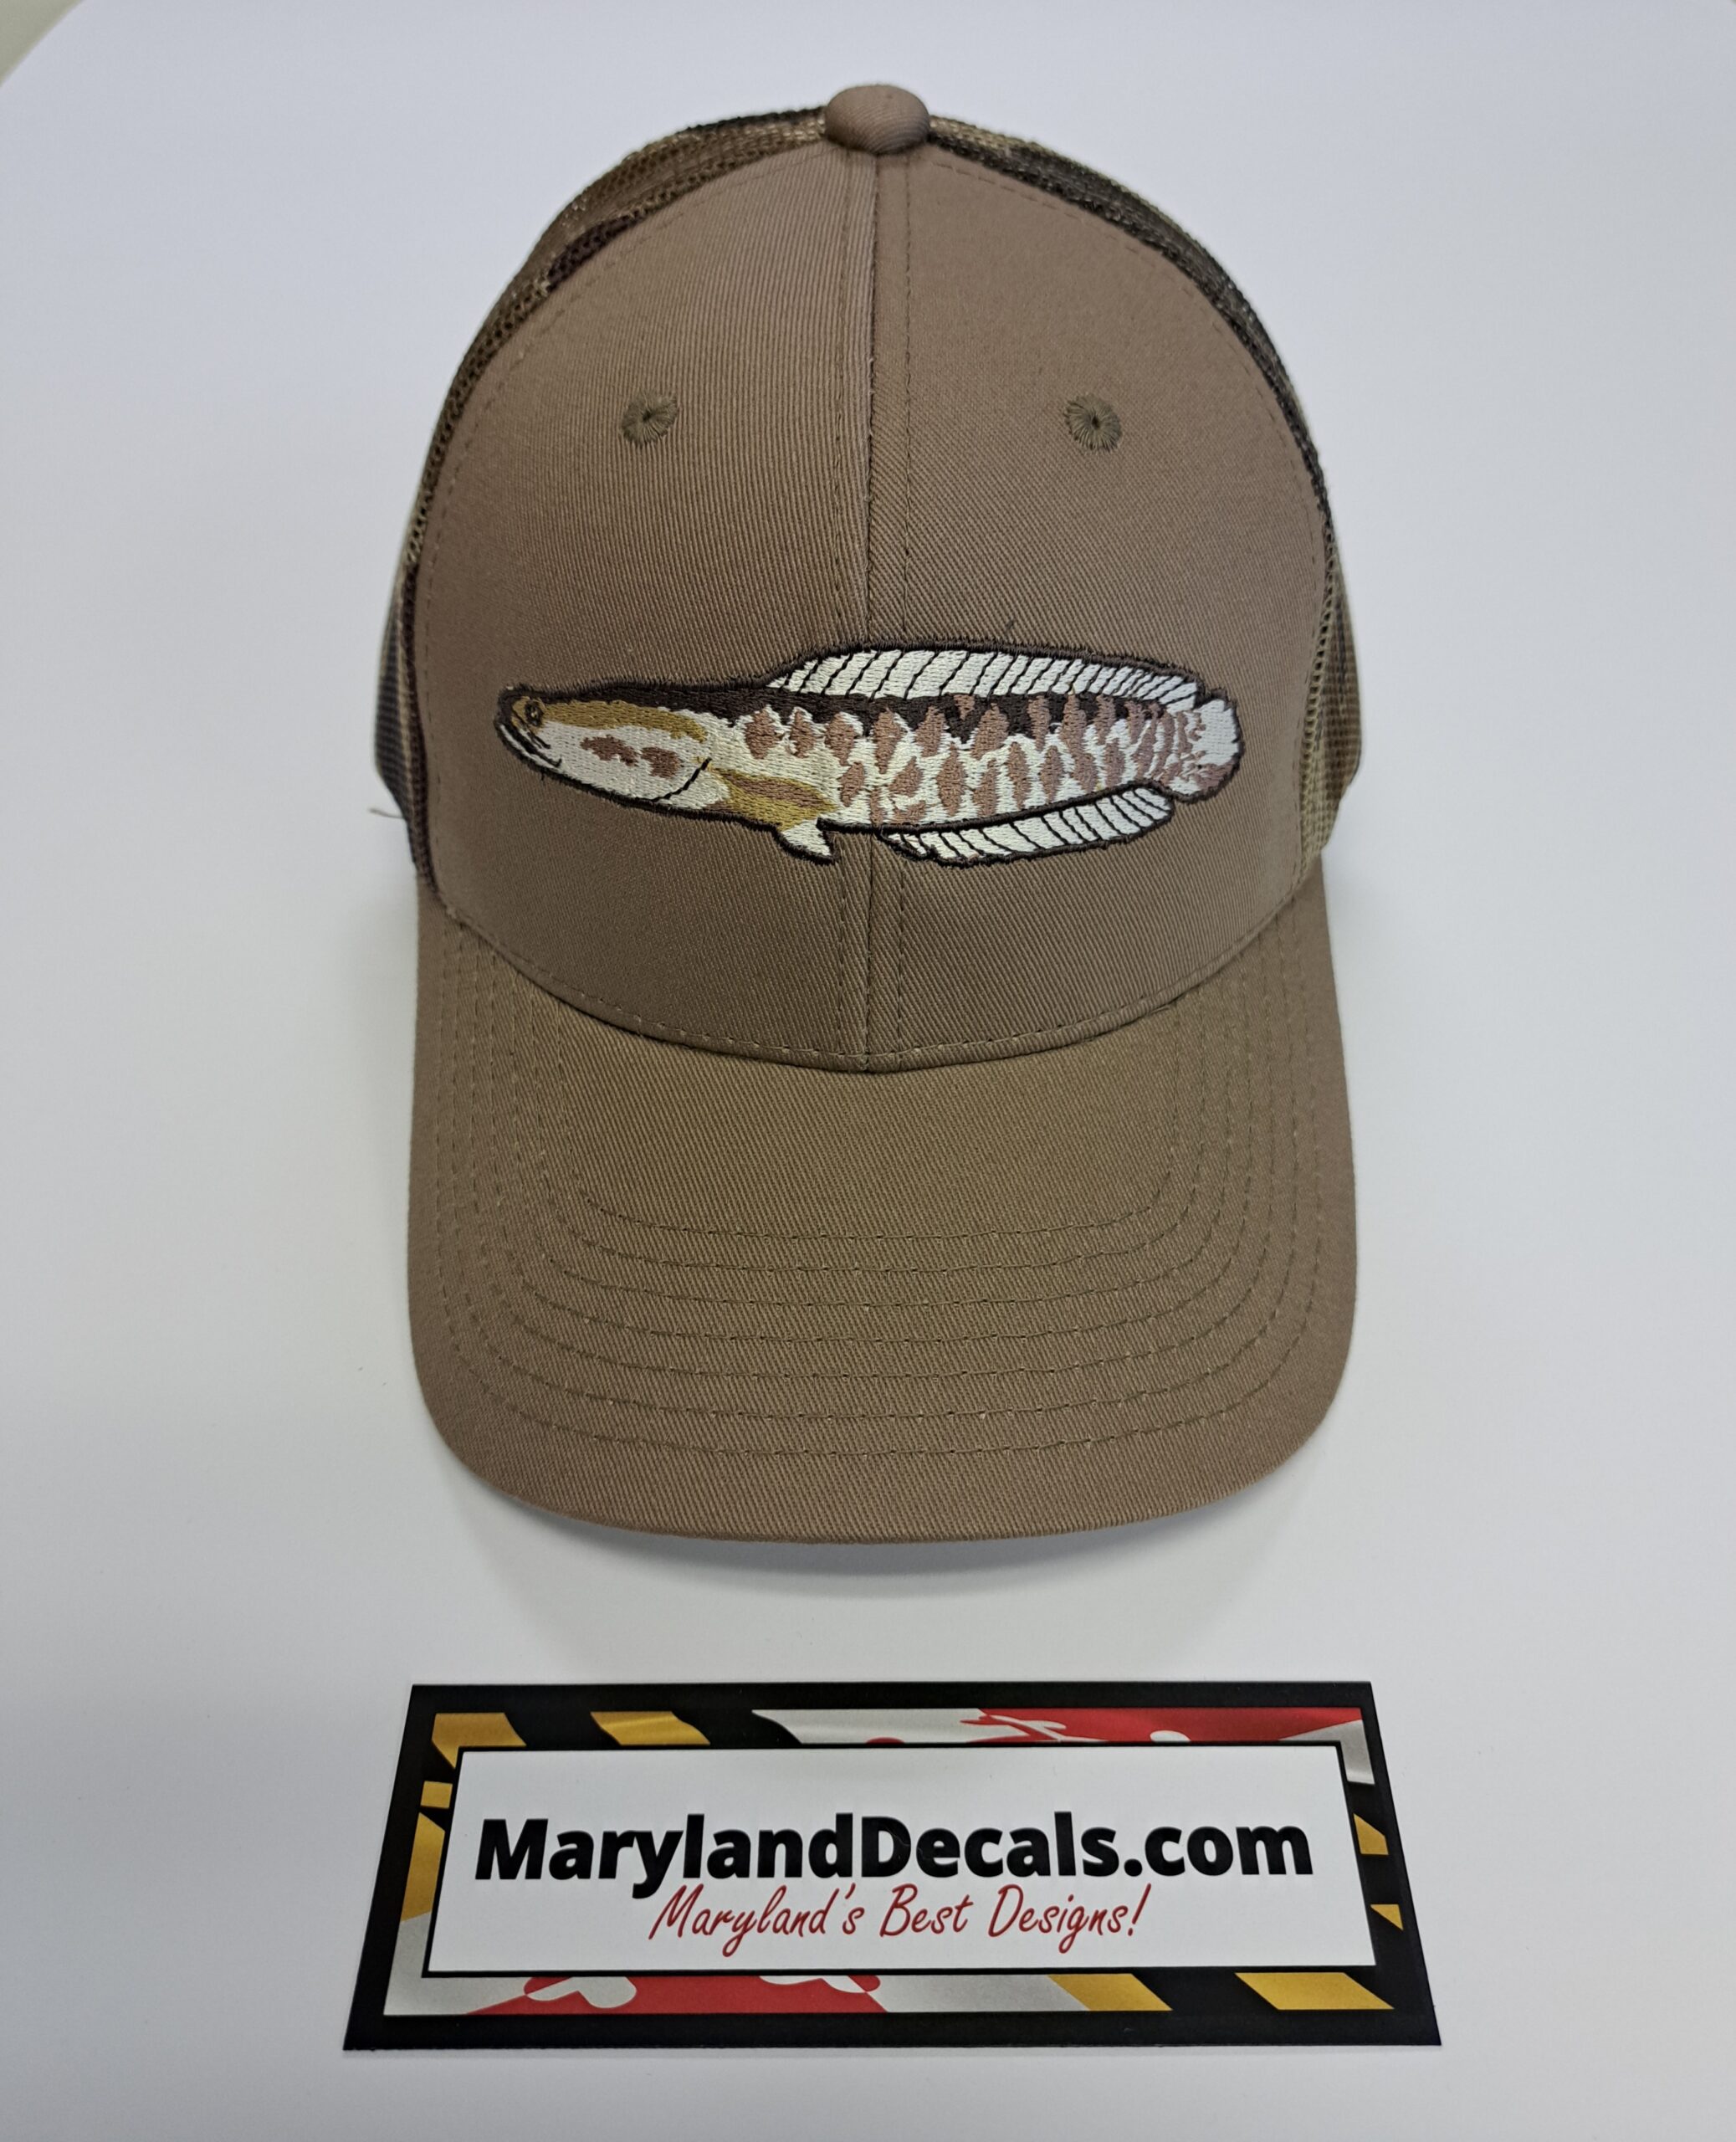 Buy Hats - Maryland Decals Stickers Magnets & Hats